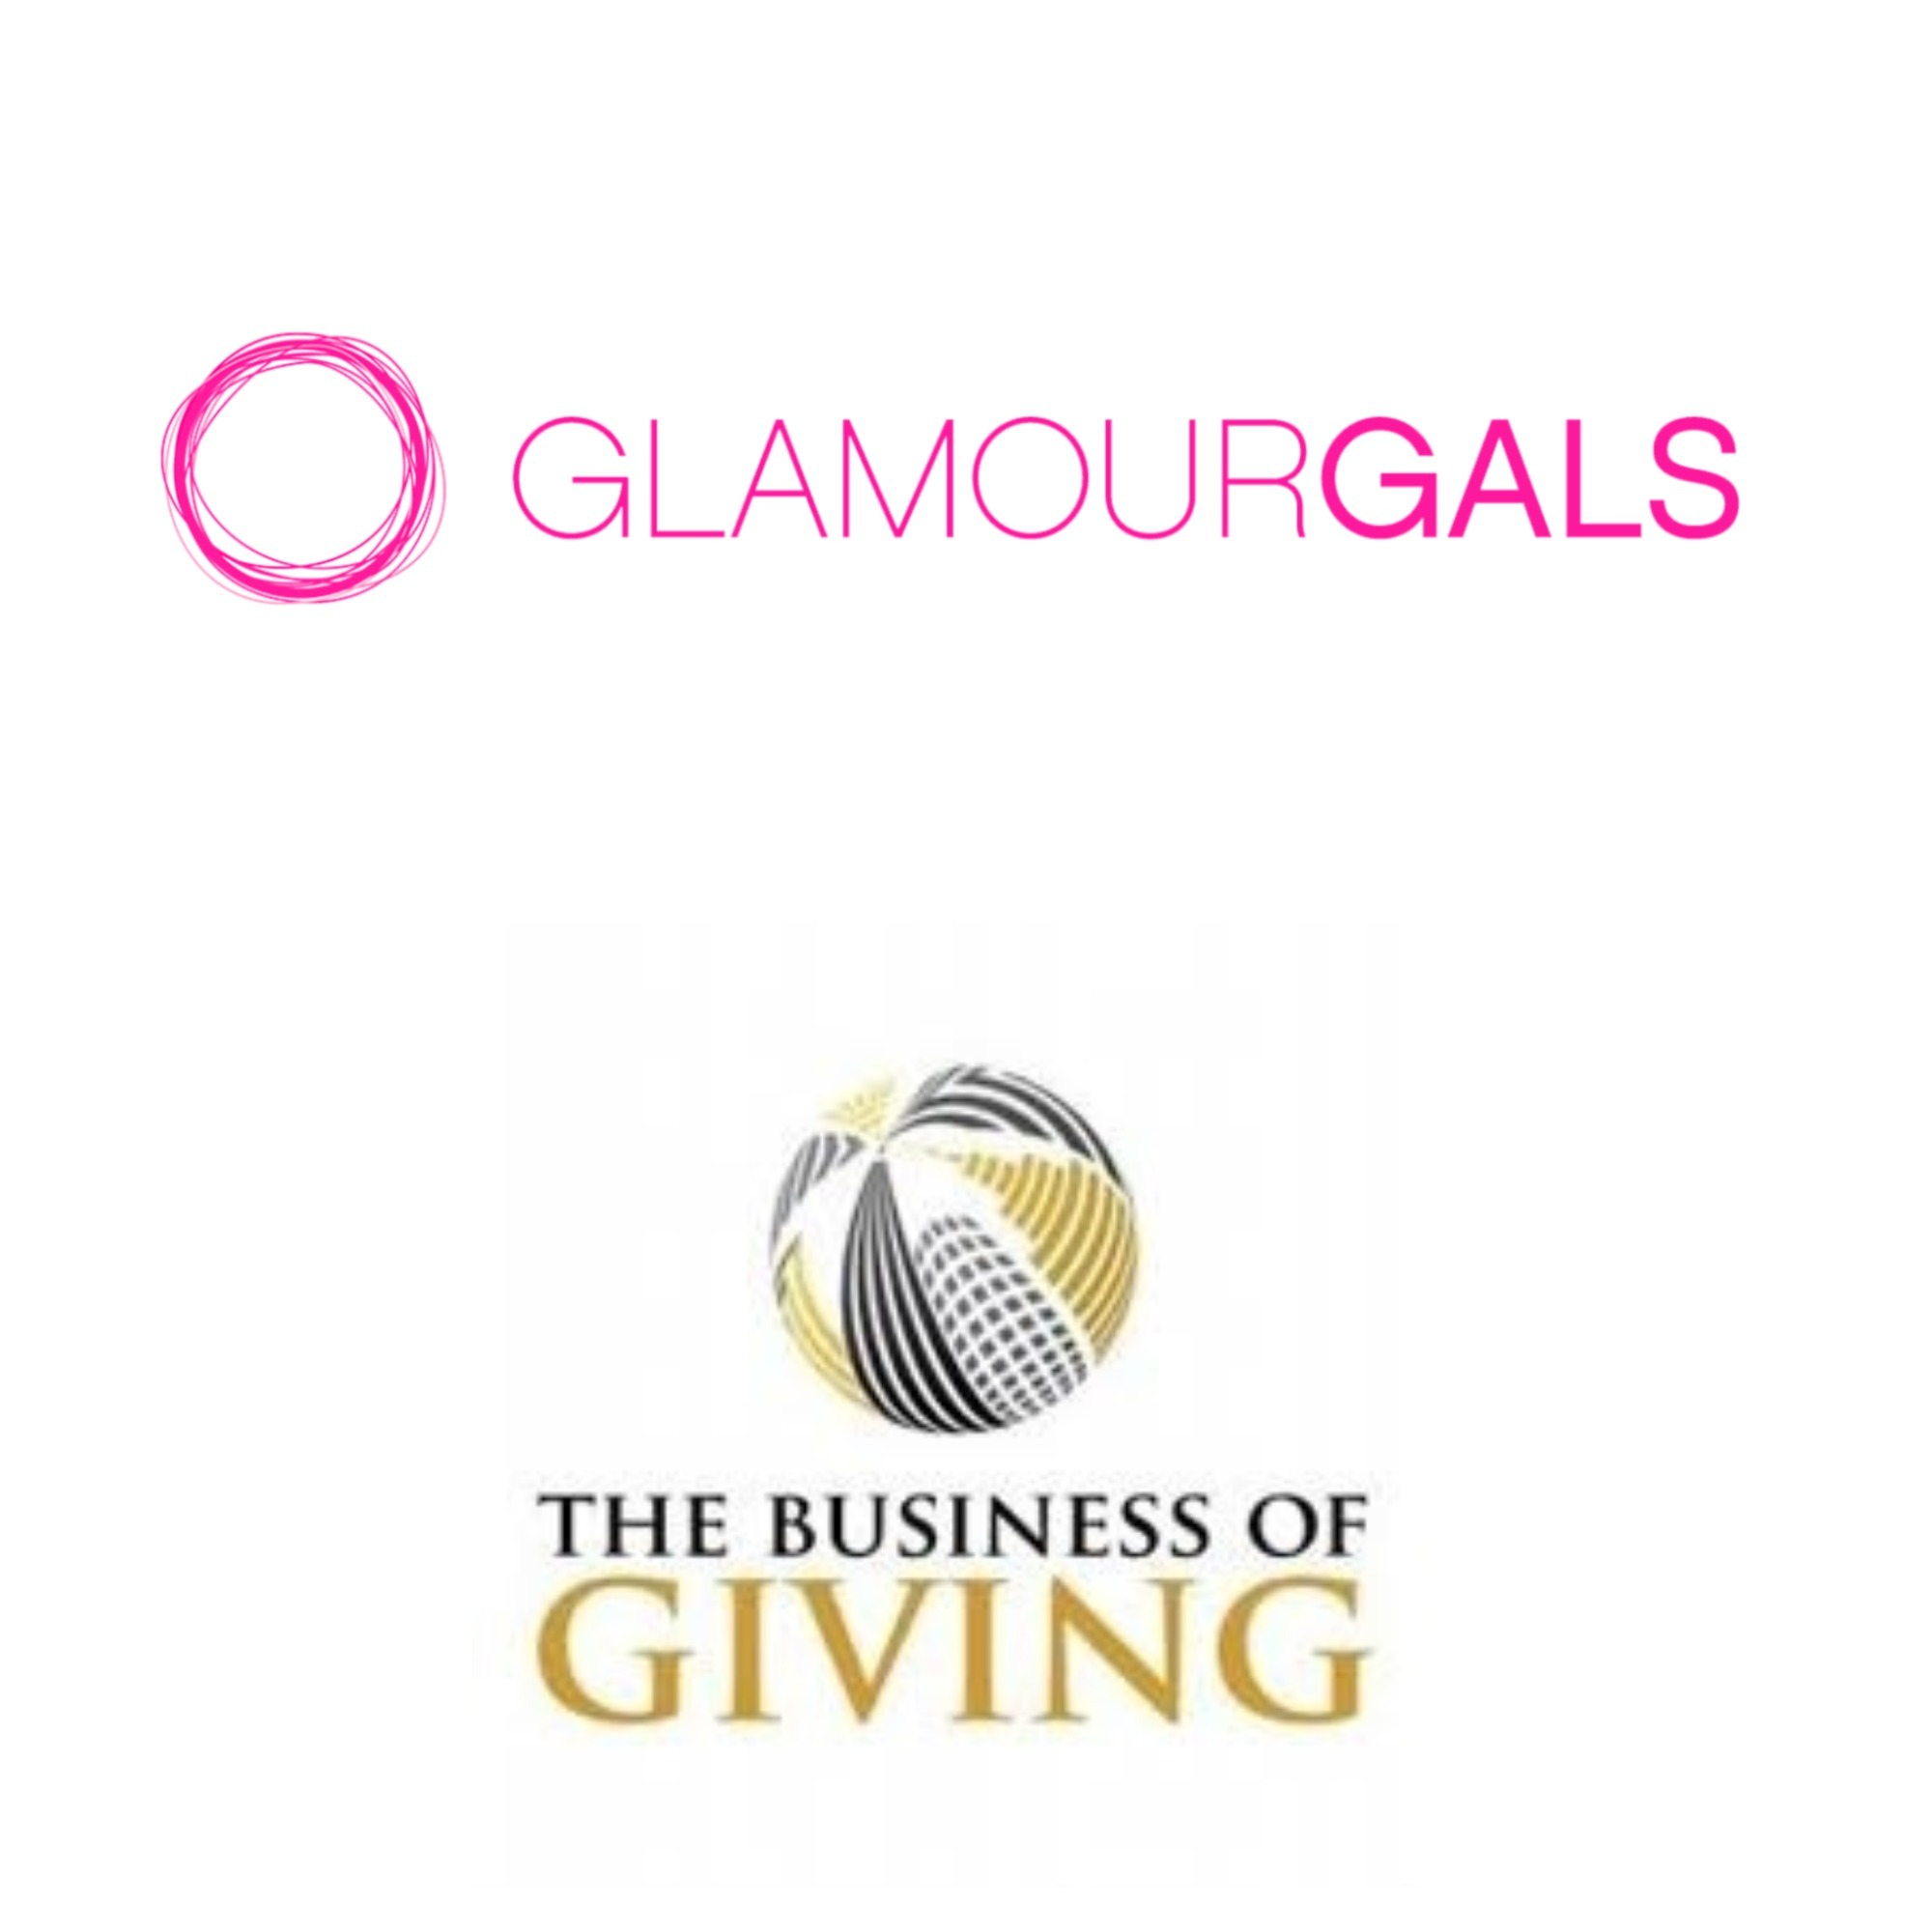 Rachel Doyle, Founder and President of Glamour Gals